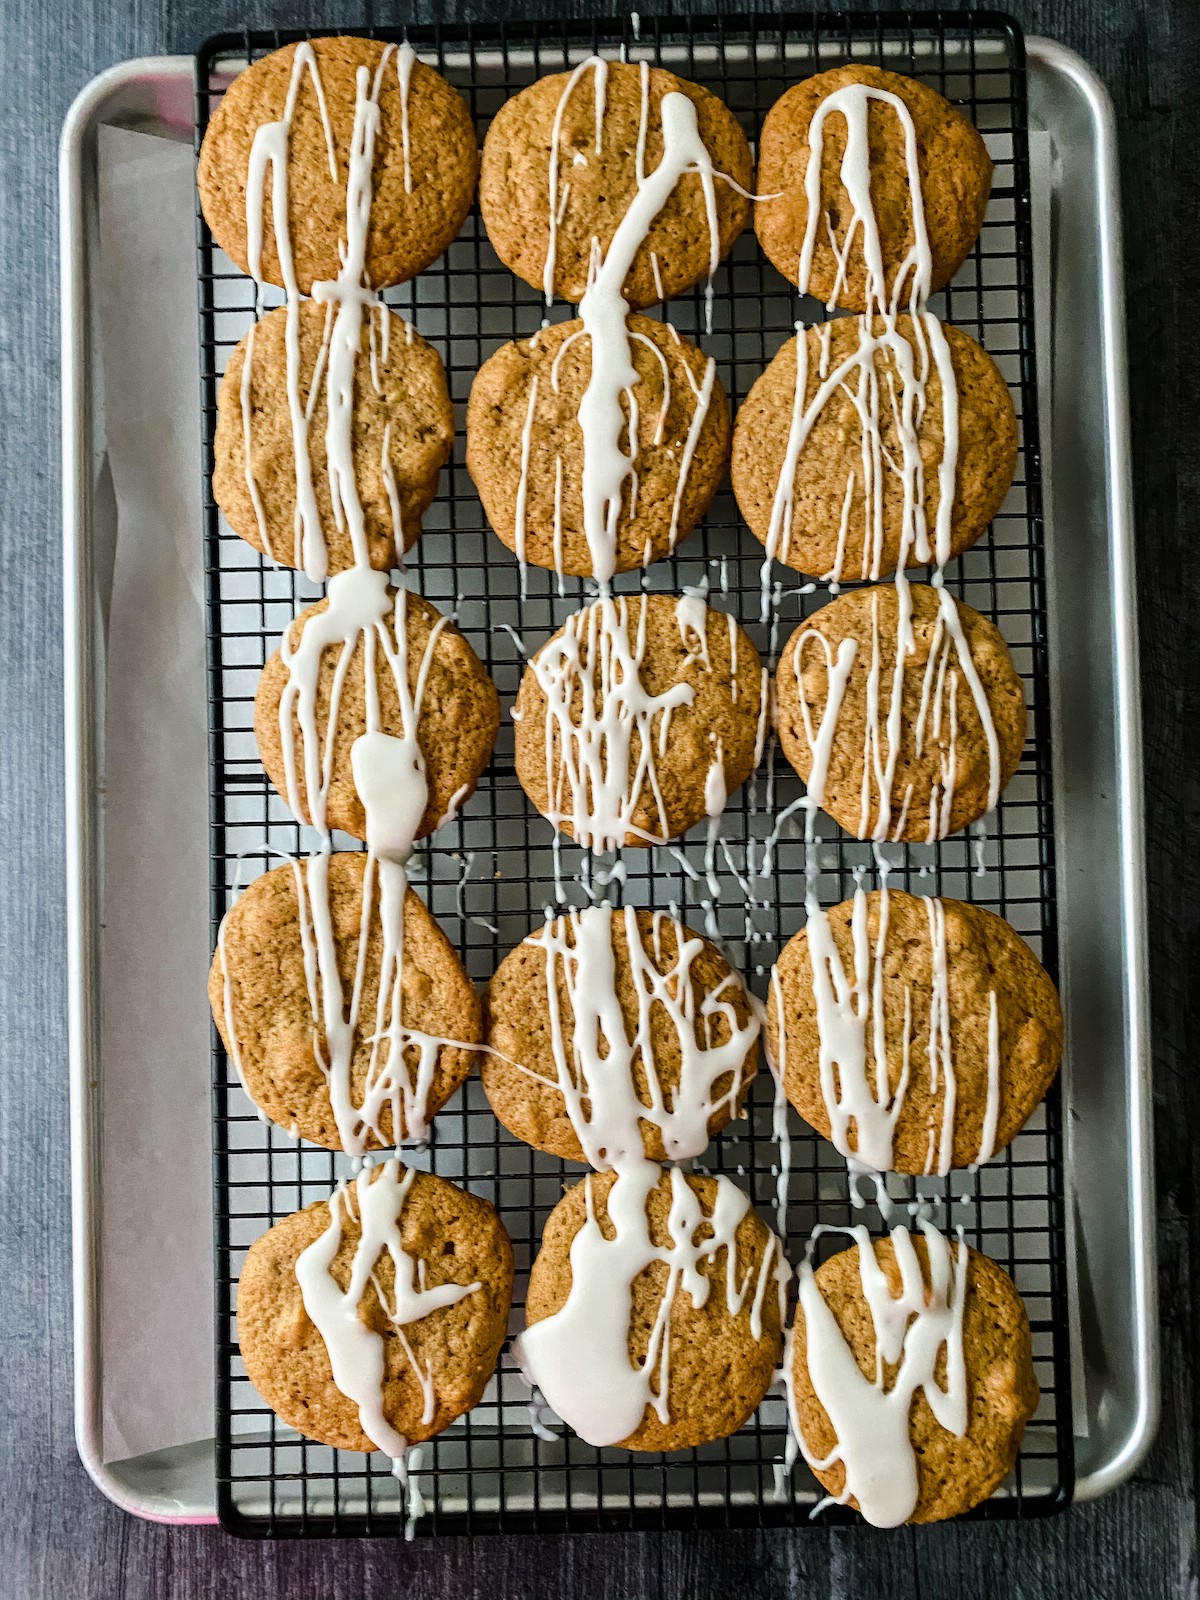 Iced cookies on wire rack